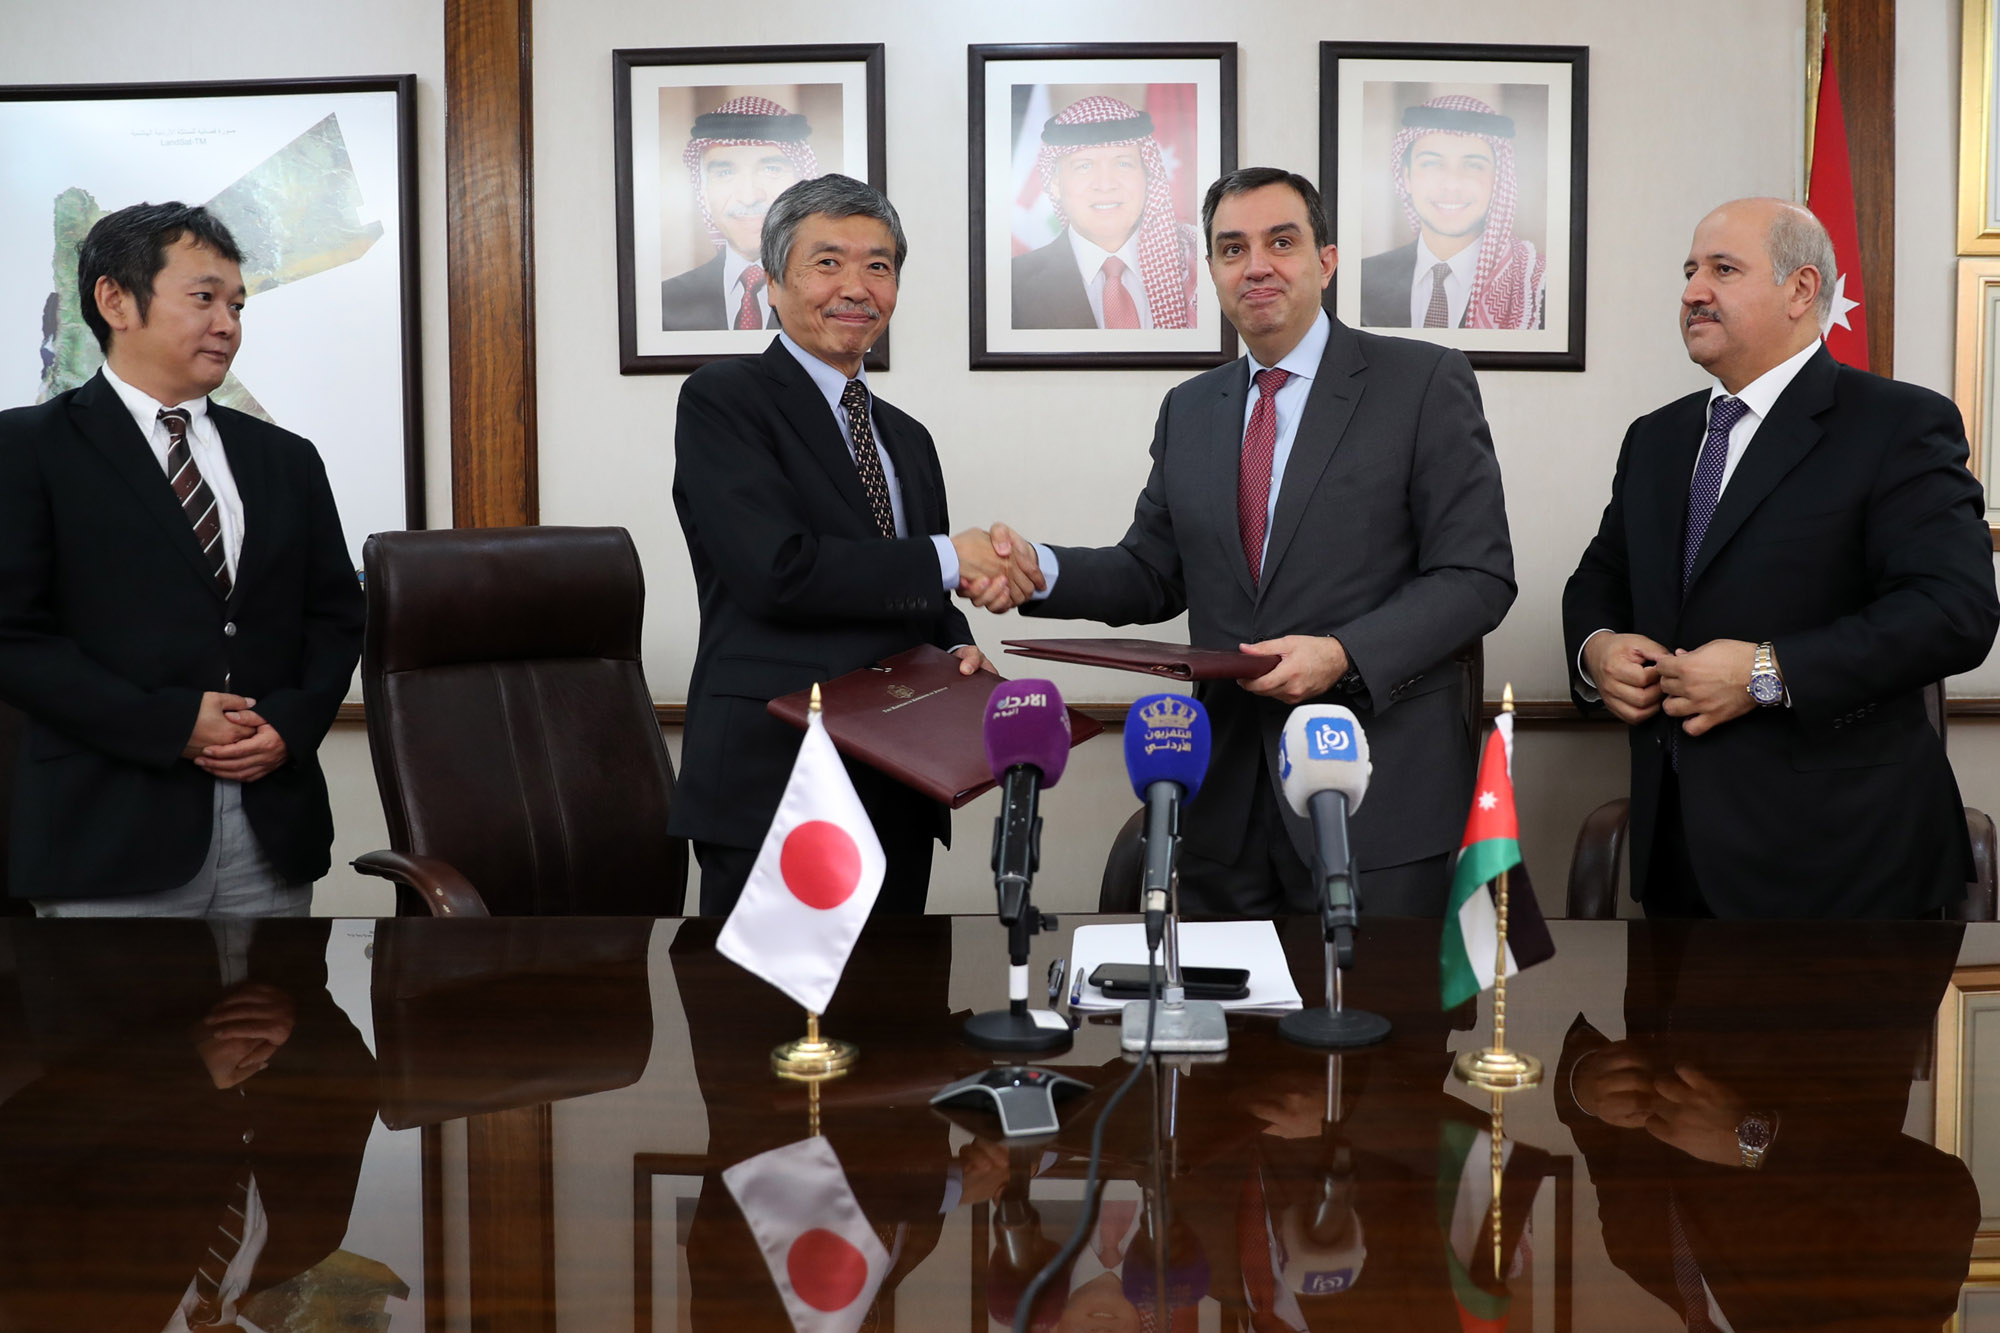 Jordan's Minister of Planning Emad Al-Fakhouri and Japanese Ambassador in Amman Shuichi Sakurai inked an additional grant agreement worth USD 12.6 million to finance a water network expansion project in Al-Balqa governorate, west of Jordan